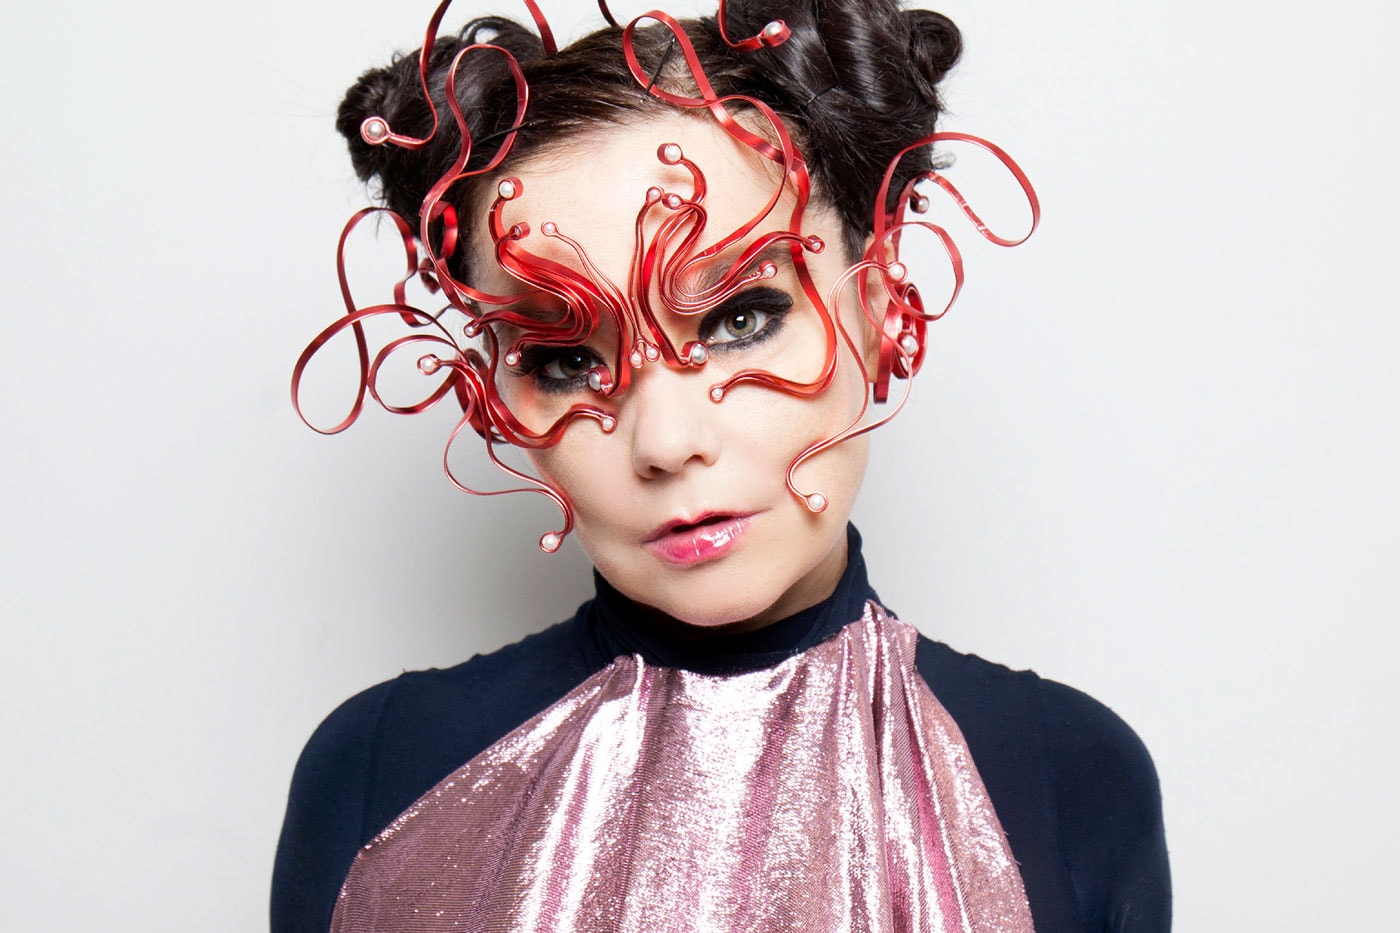 Watch Björk's Twisted “Mouth Mantra” Video